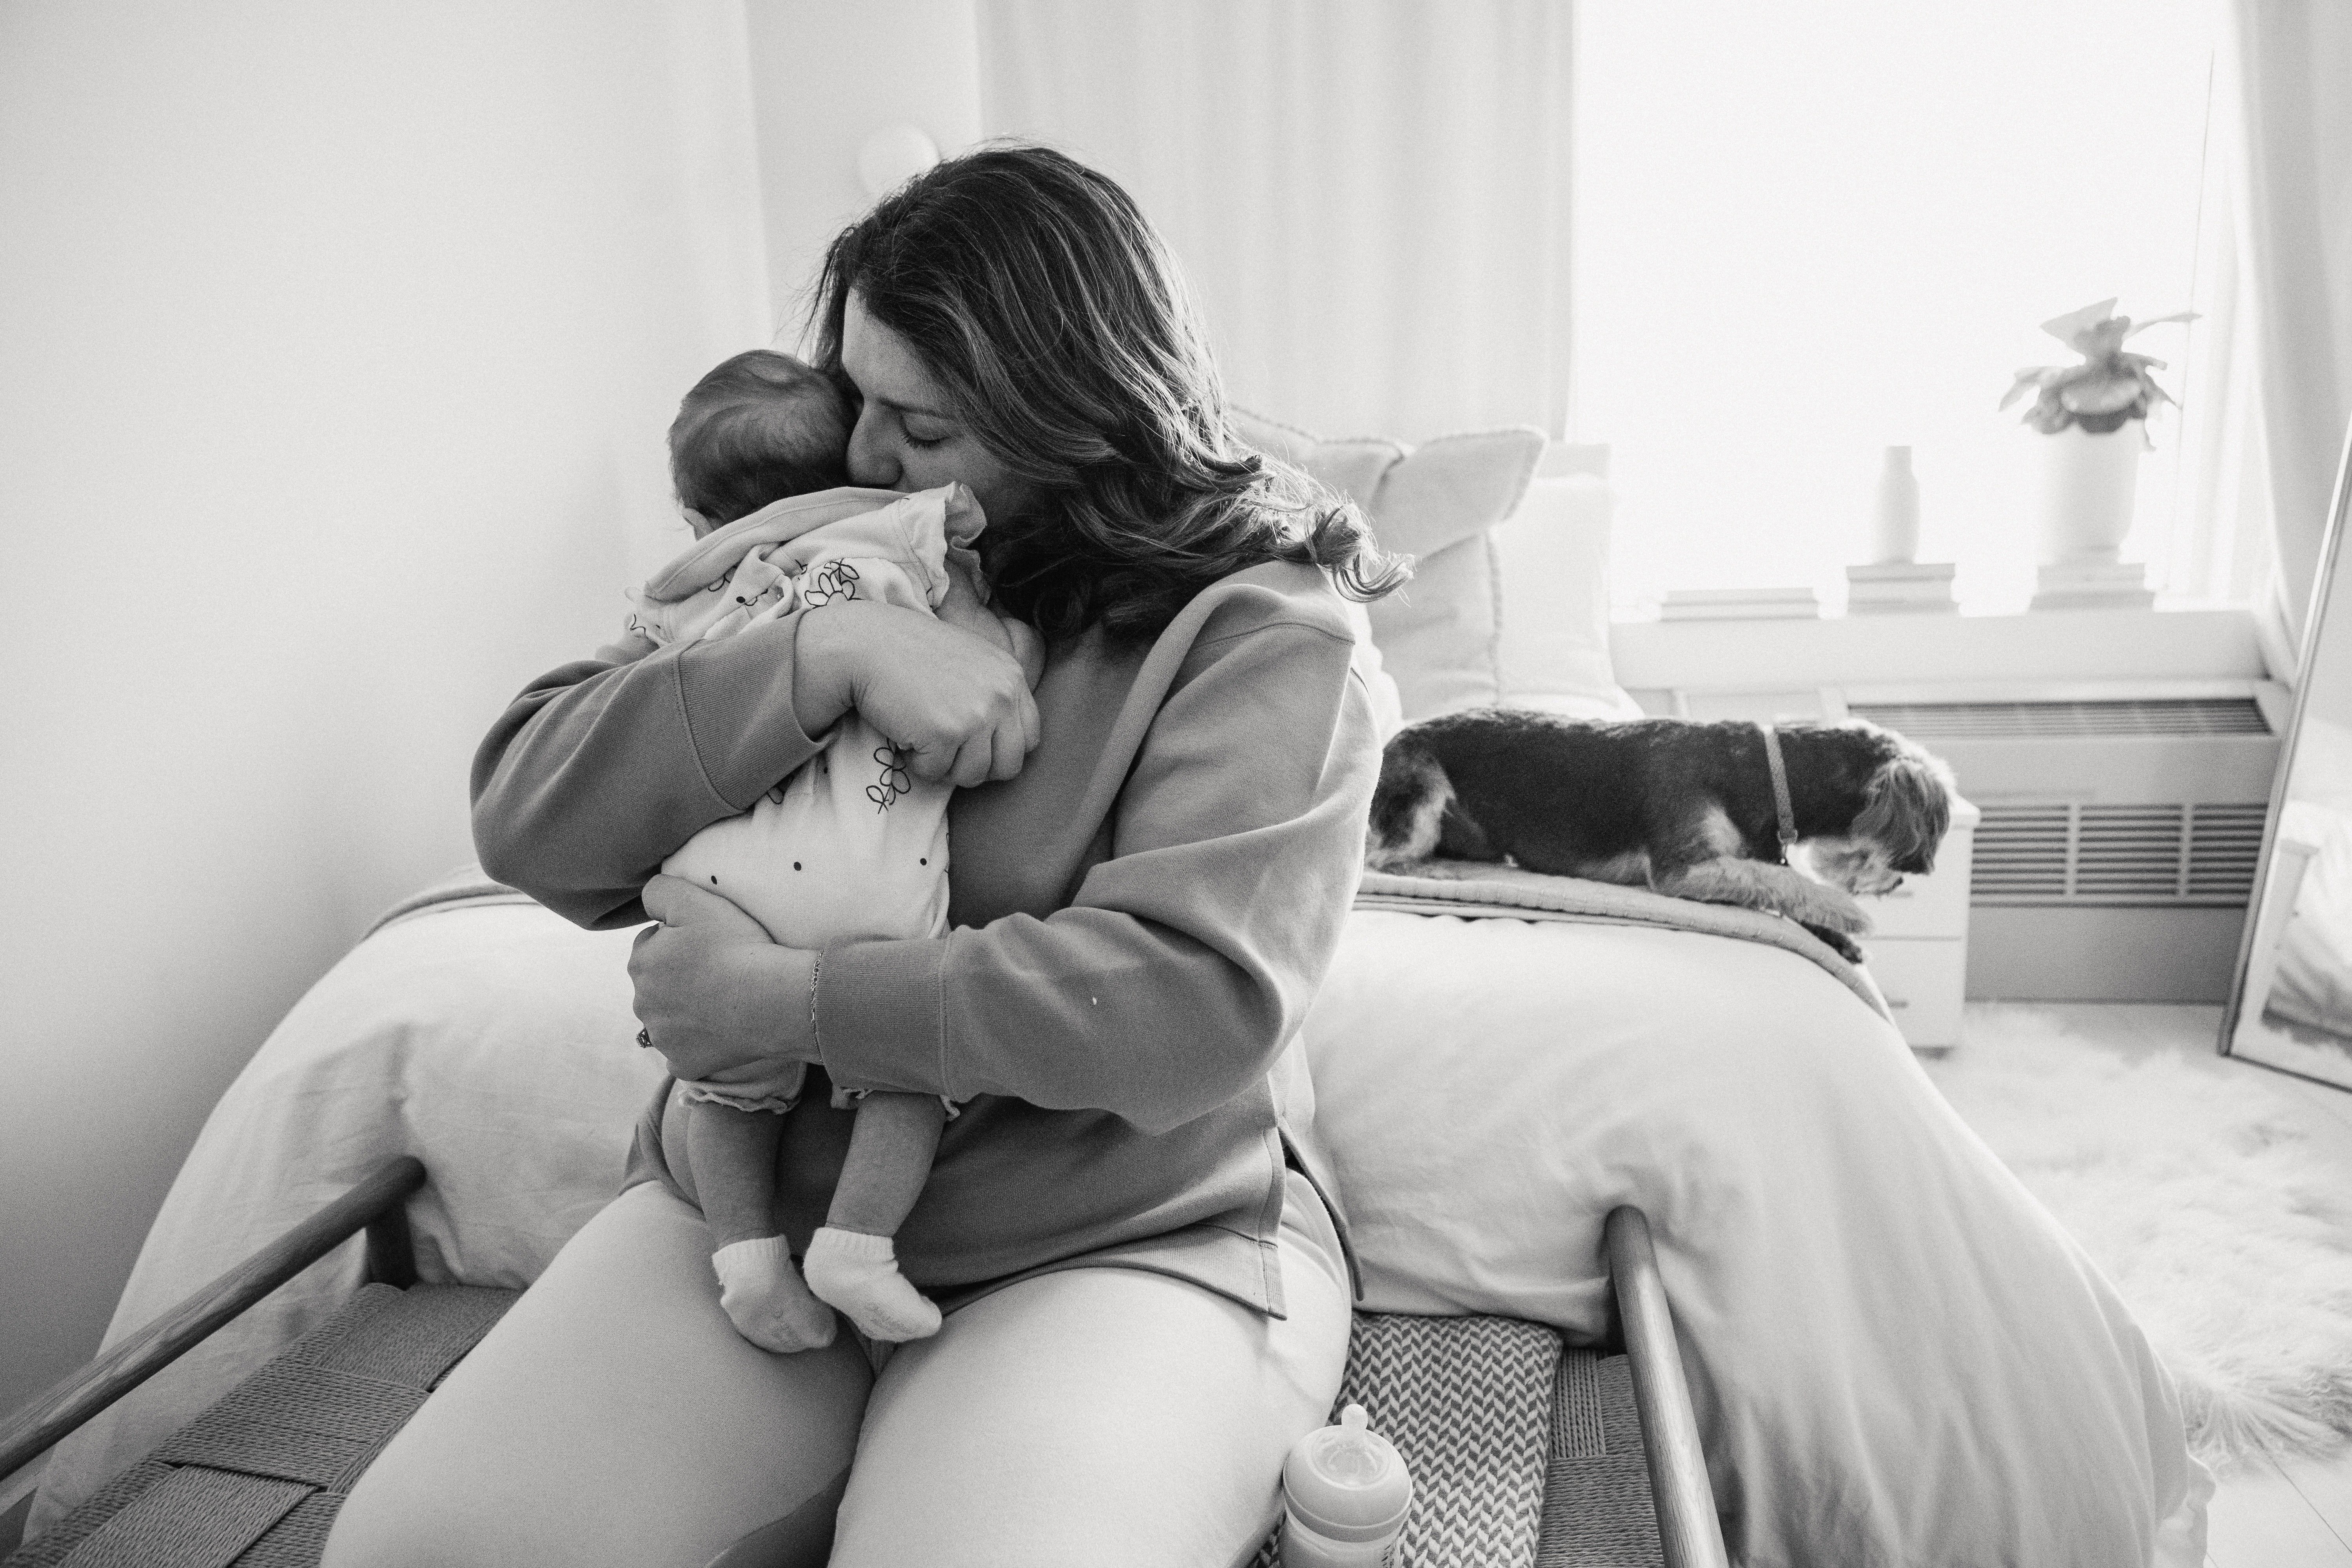 A woman cuddling a baby. | Source: Pexels